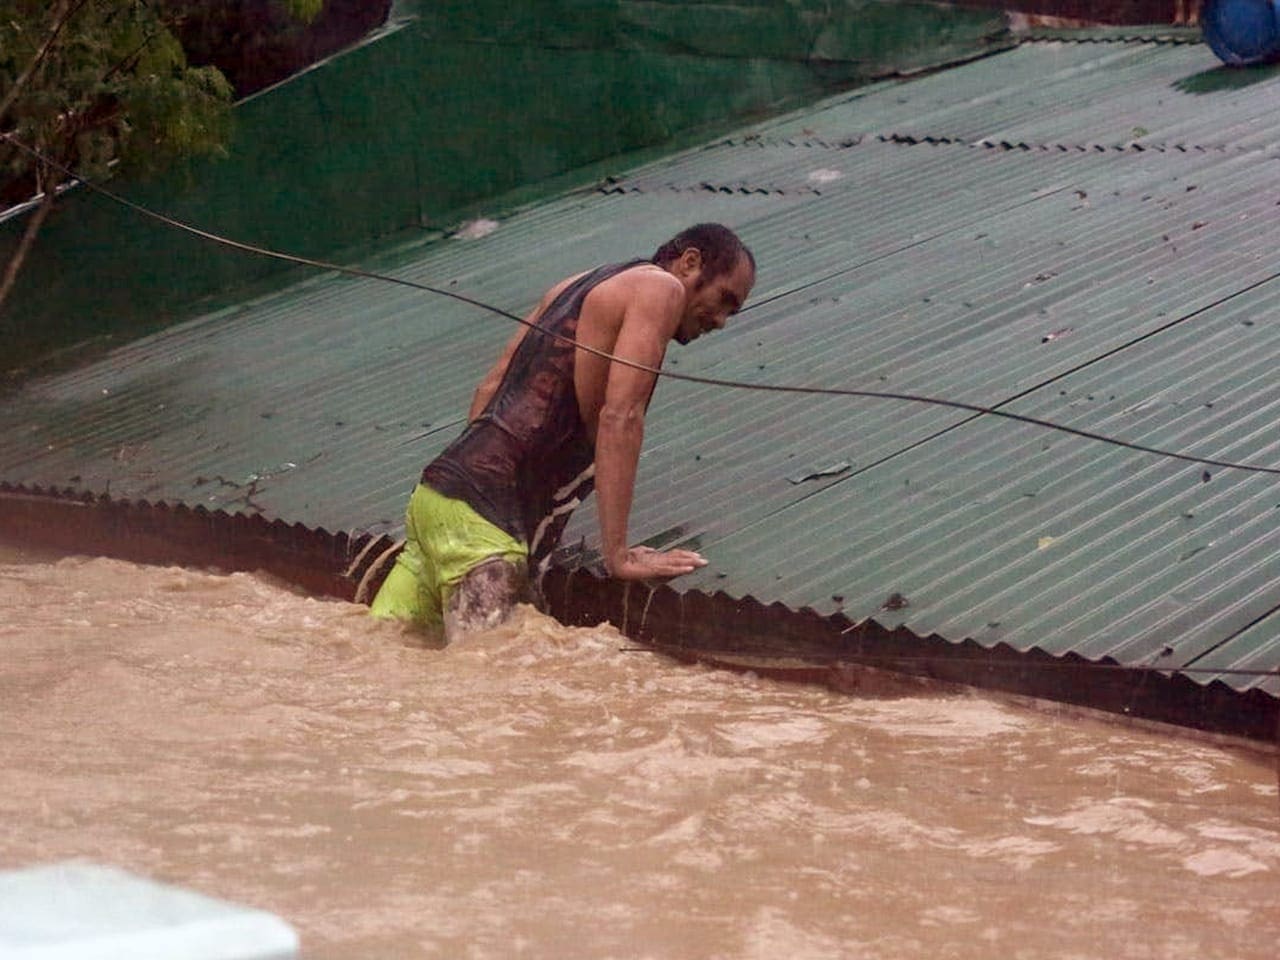 A man lifts himself onto a roof as his legs are submerged in flood water.